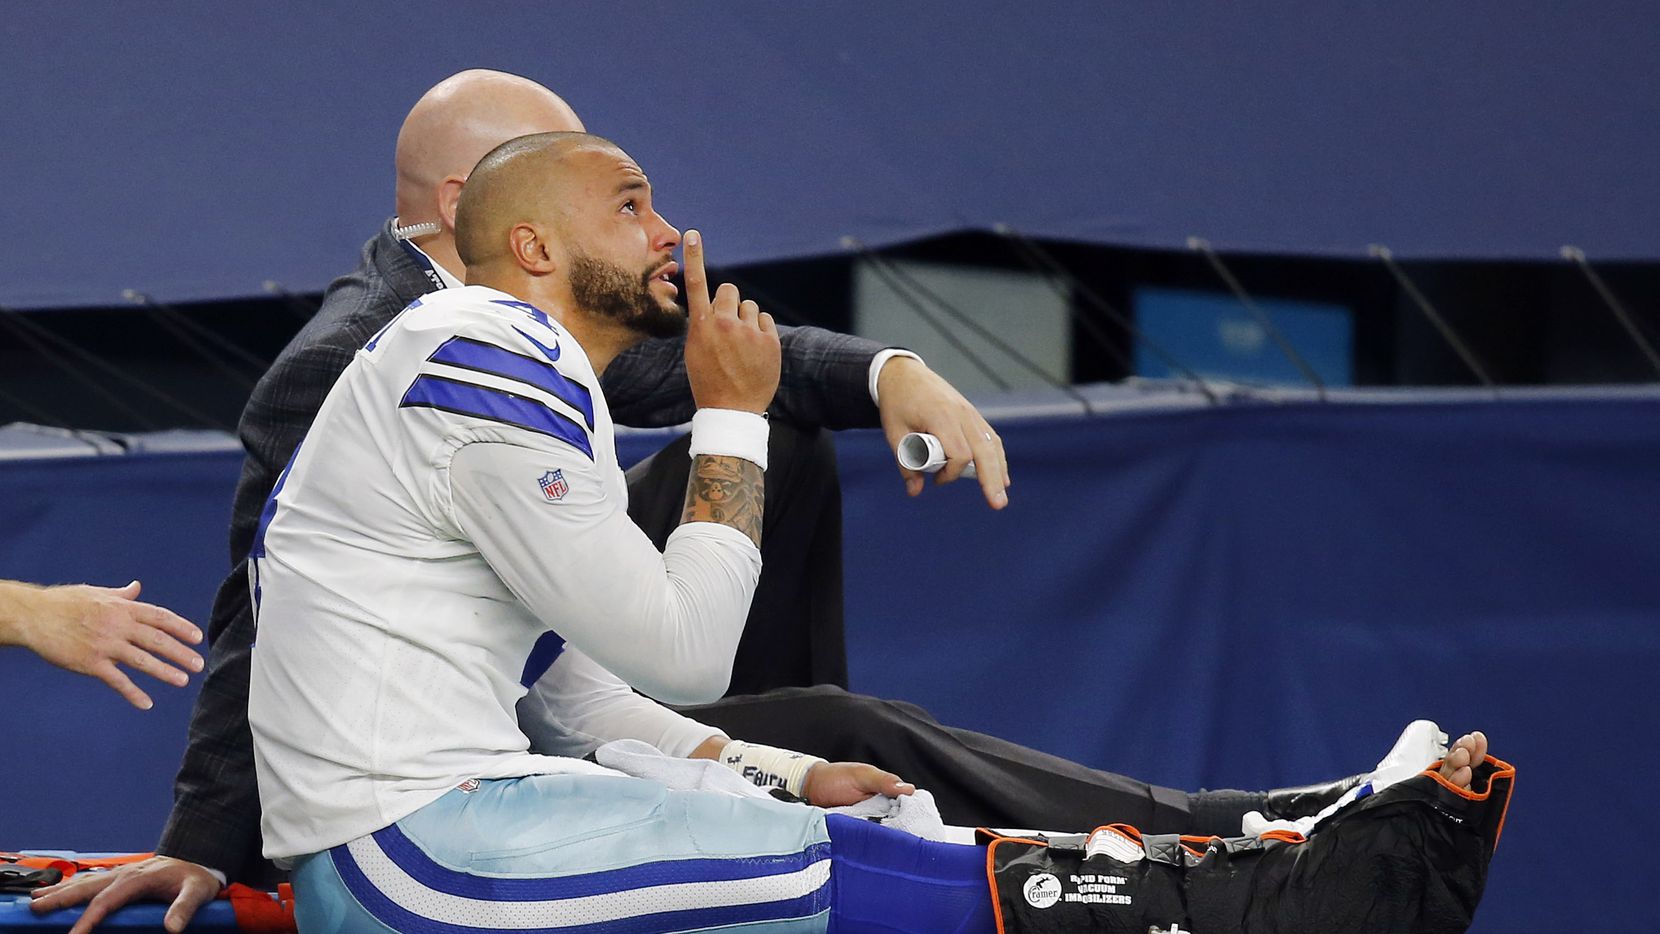 With tears in his eyes, Dallas Cowboys quarterback Dak Prescott (4) points skyward as he is carted off the field after sustaining a leg injury in the third quarter at AT&T Stadium Stadium in Arlington, Texas, Sunday, October 11, 2020. The Cowboys are facing the New York Giants.